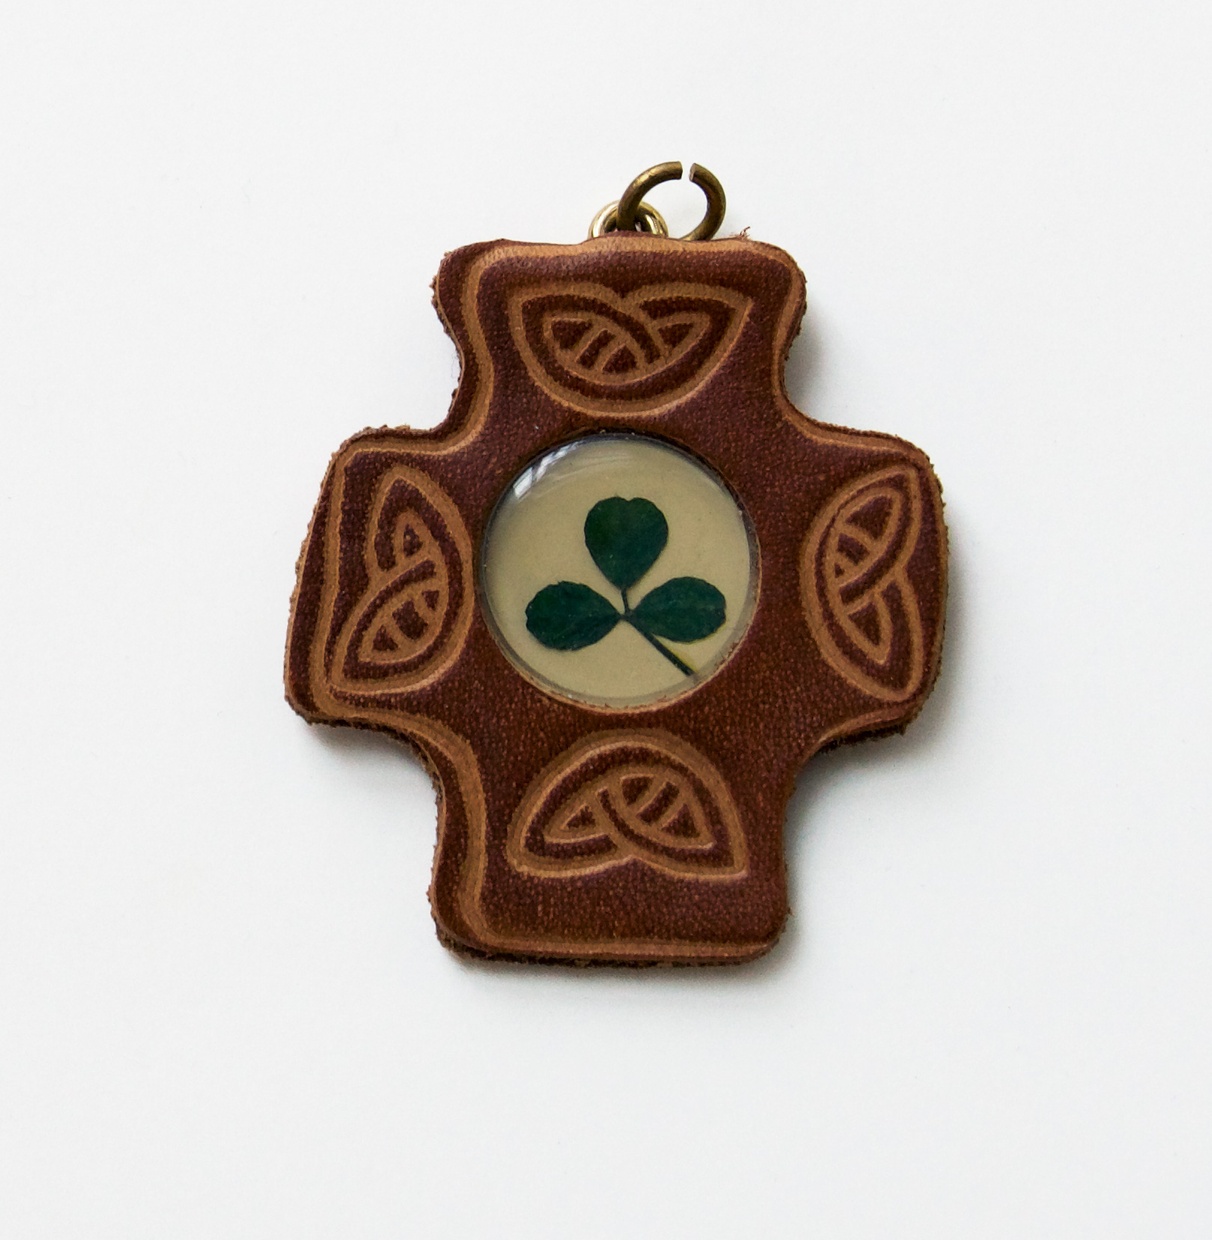 A decorative cross with a clover encased in the center